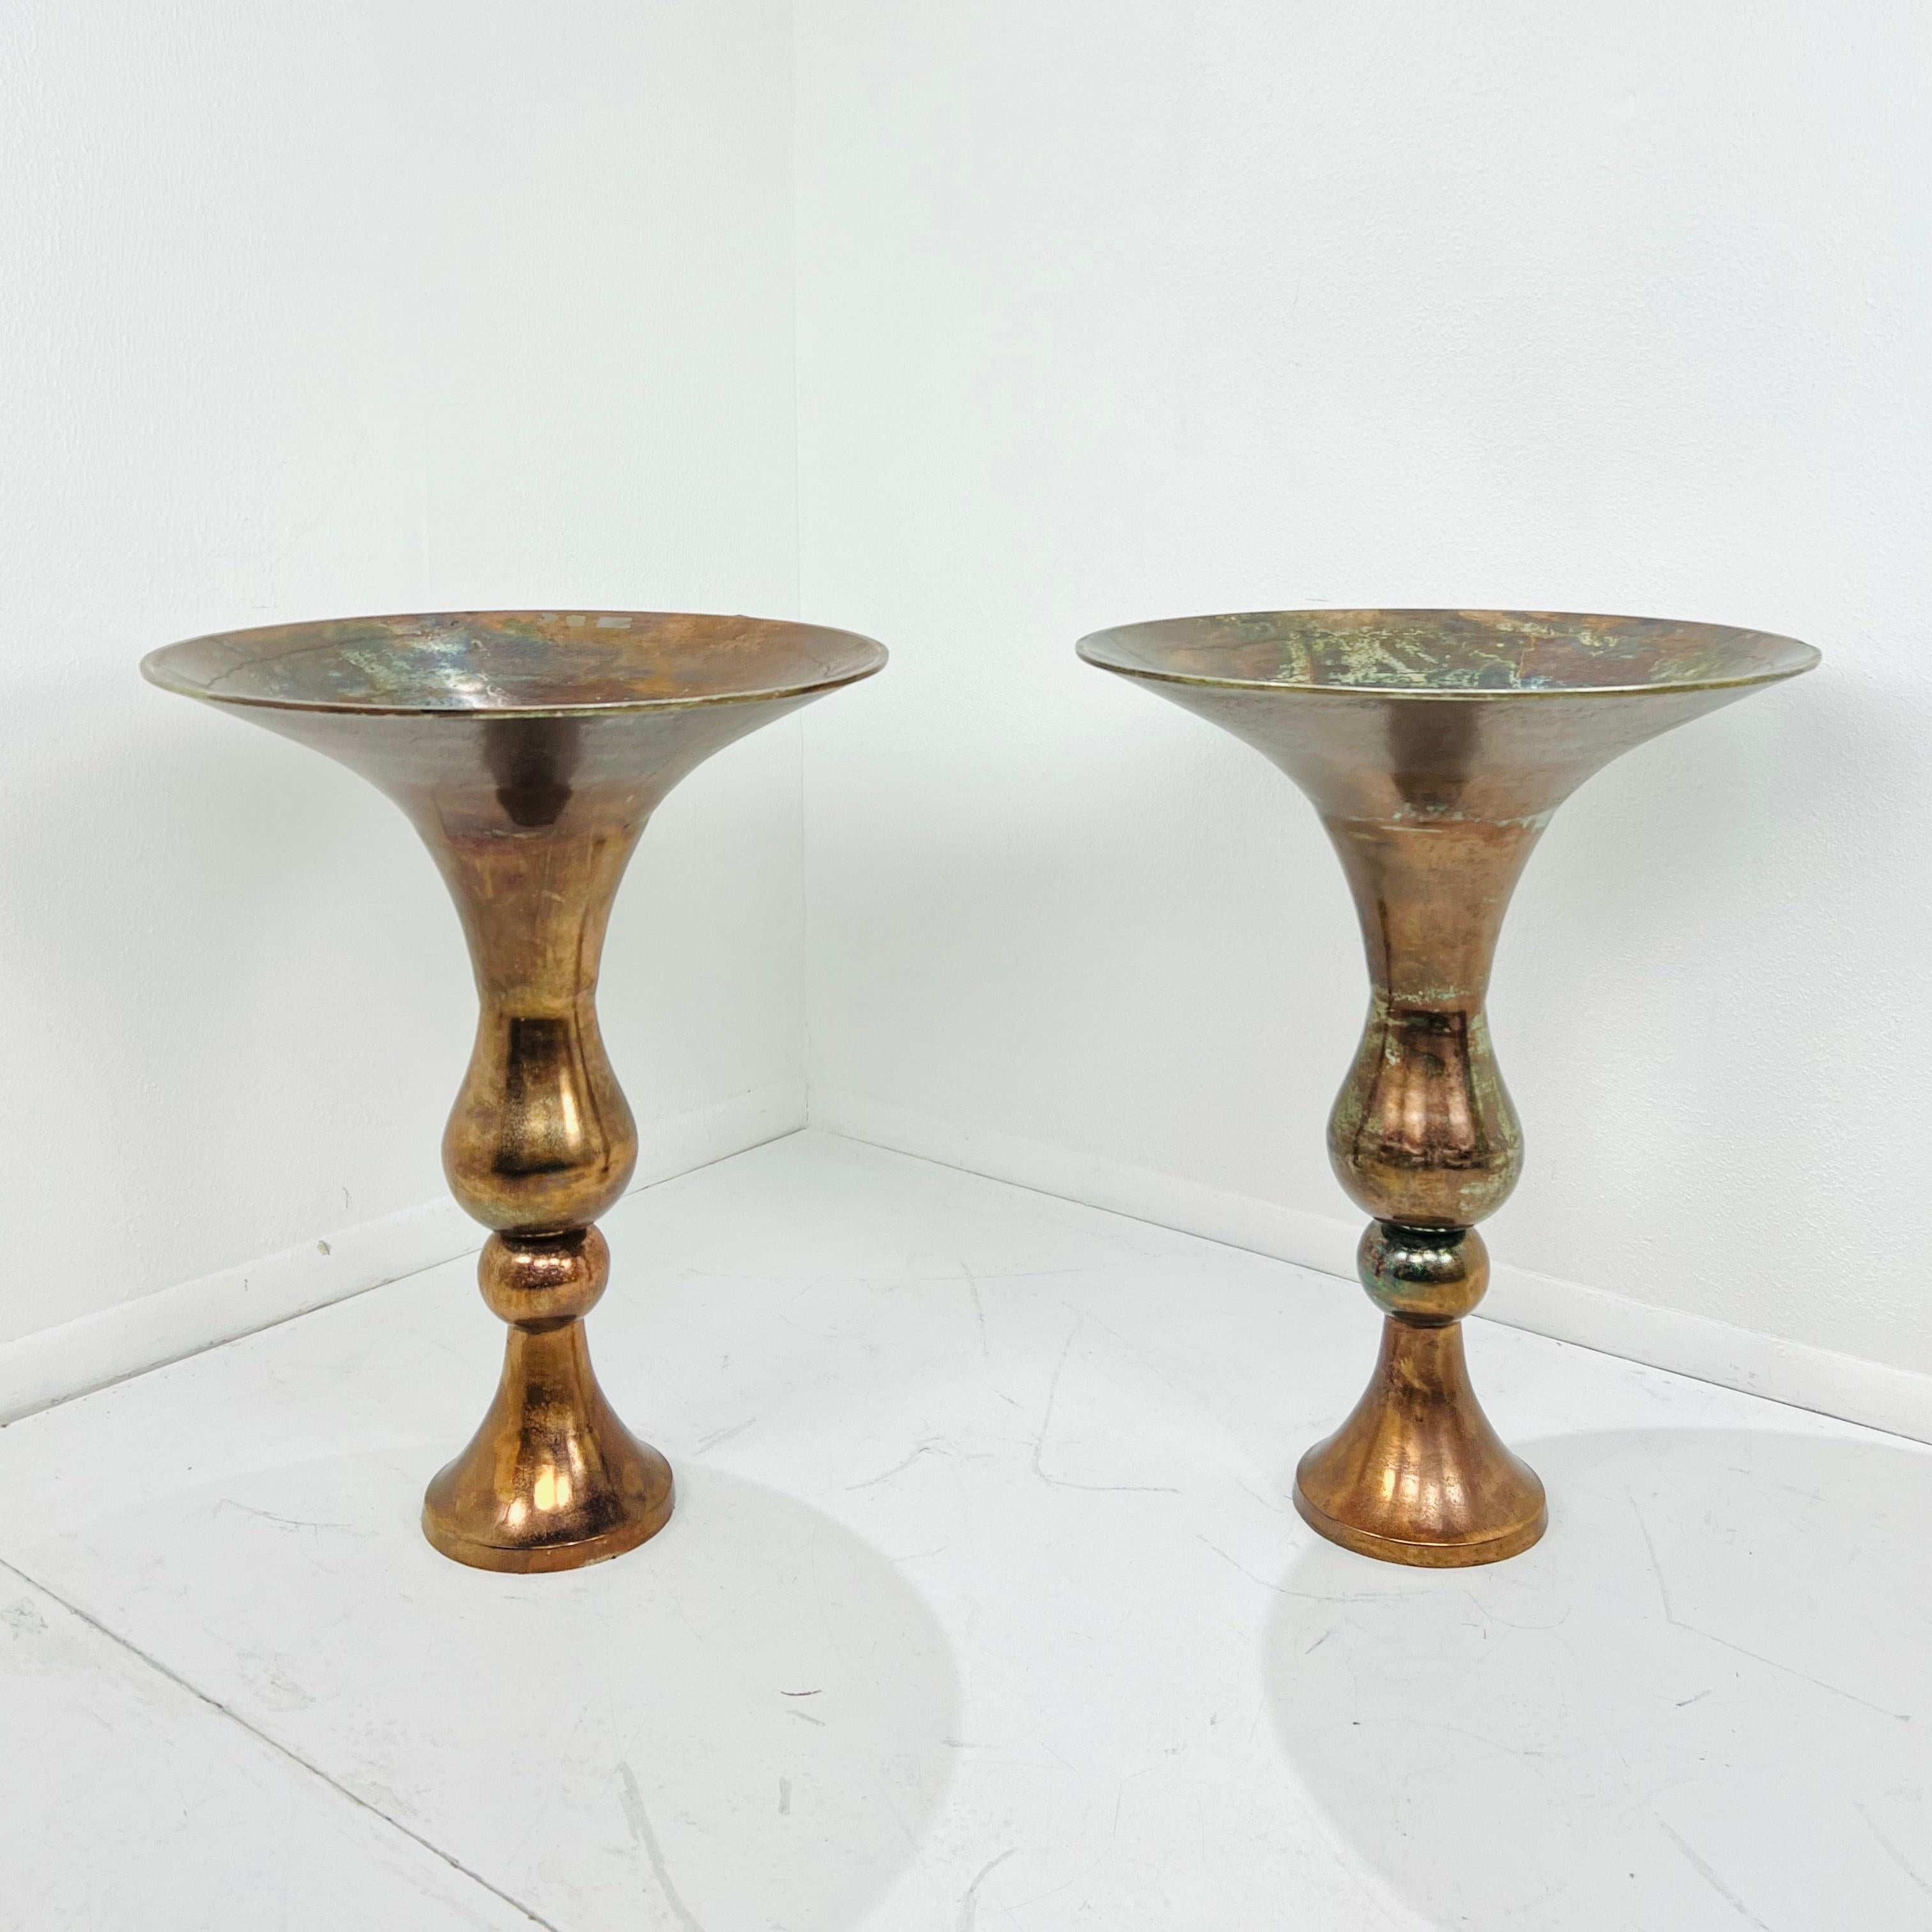 Pair of oversized copper finish floor vases. Good vintage condition with some imperfections to copper finish due to age and use. 
30.75